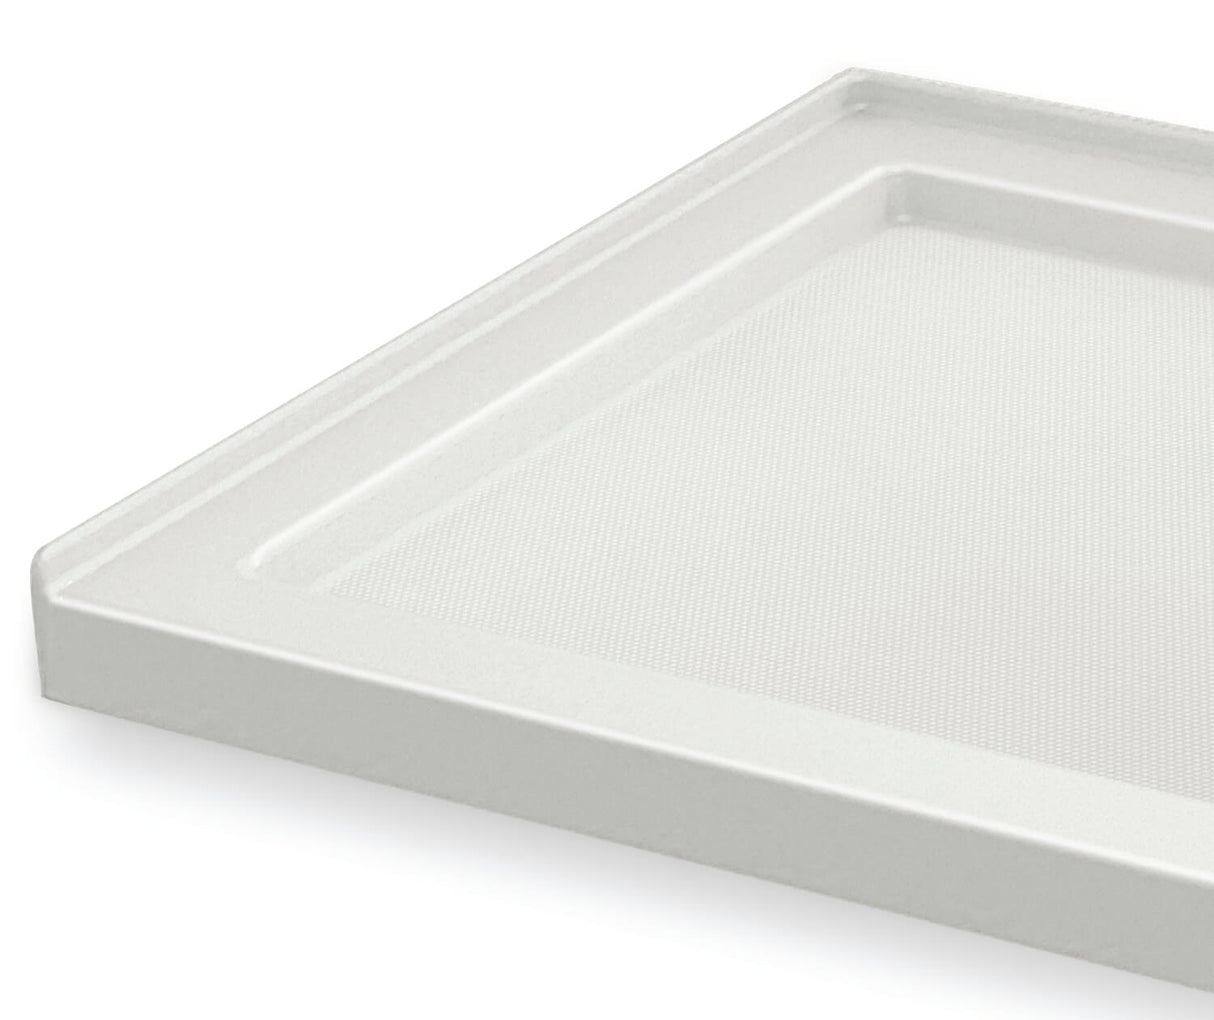 MAAX 420006-541-001-101 B3Square 6036 Acrylic Alcove Shower Base in White with Anti-slip Bottom with Right-Hand Drain